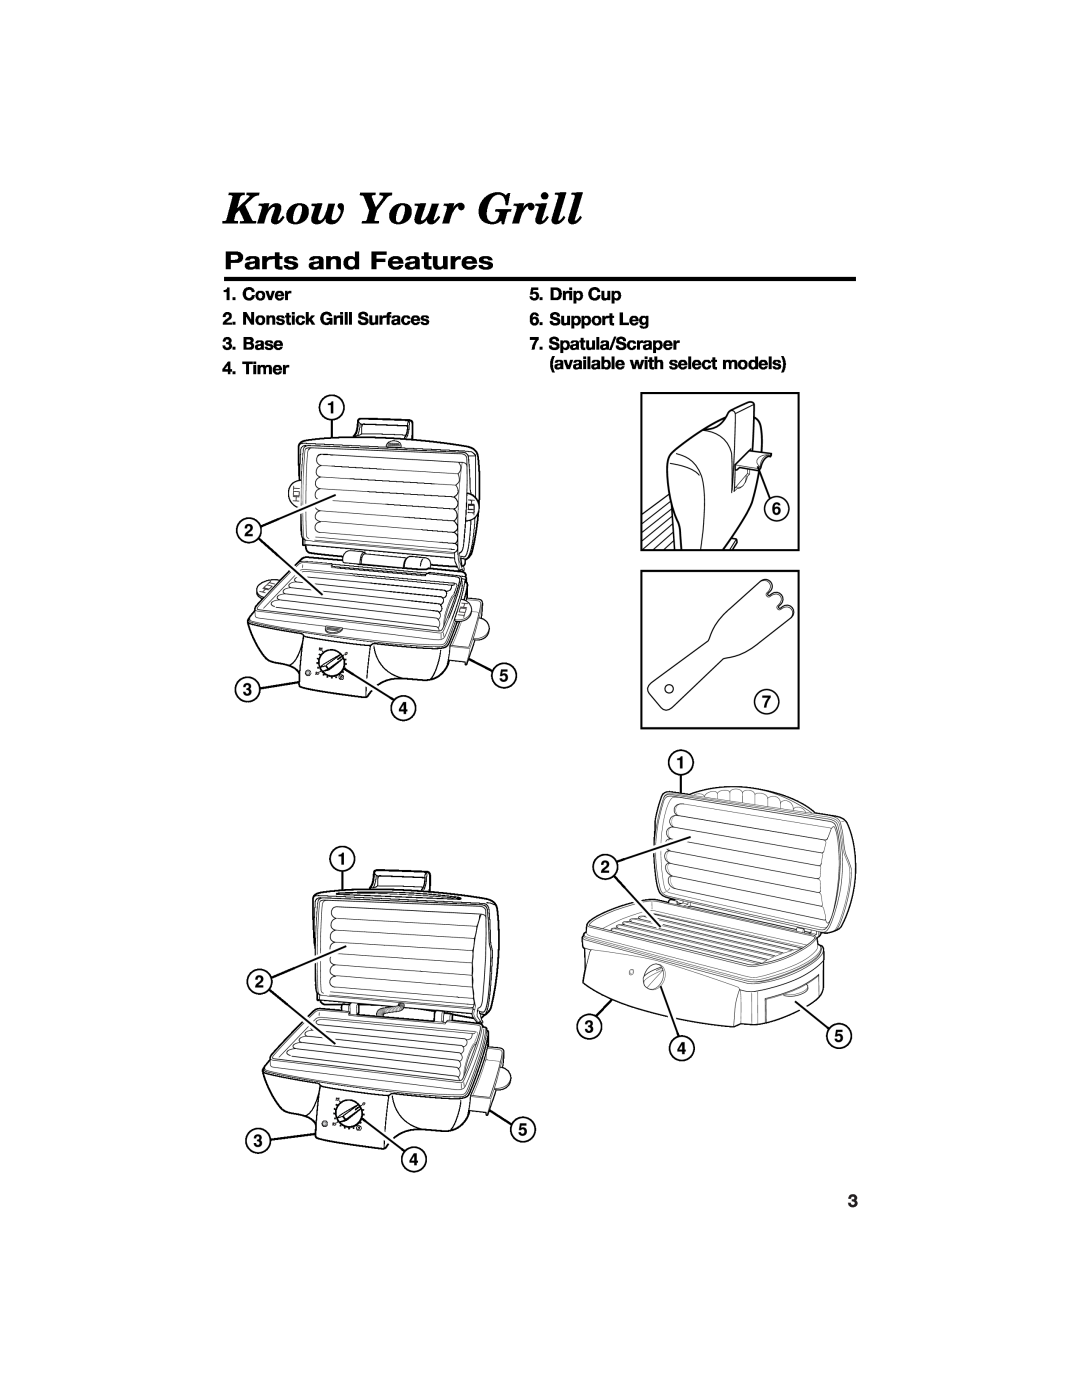 Hamilton Beach 840100500 manual Know Your Grill, Parts and Features 